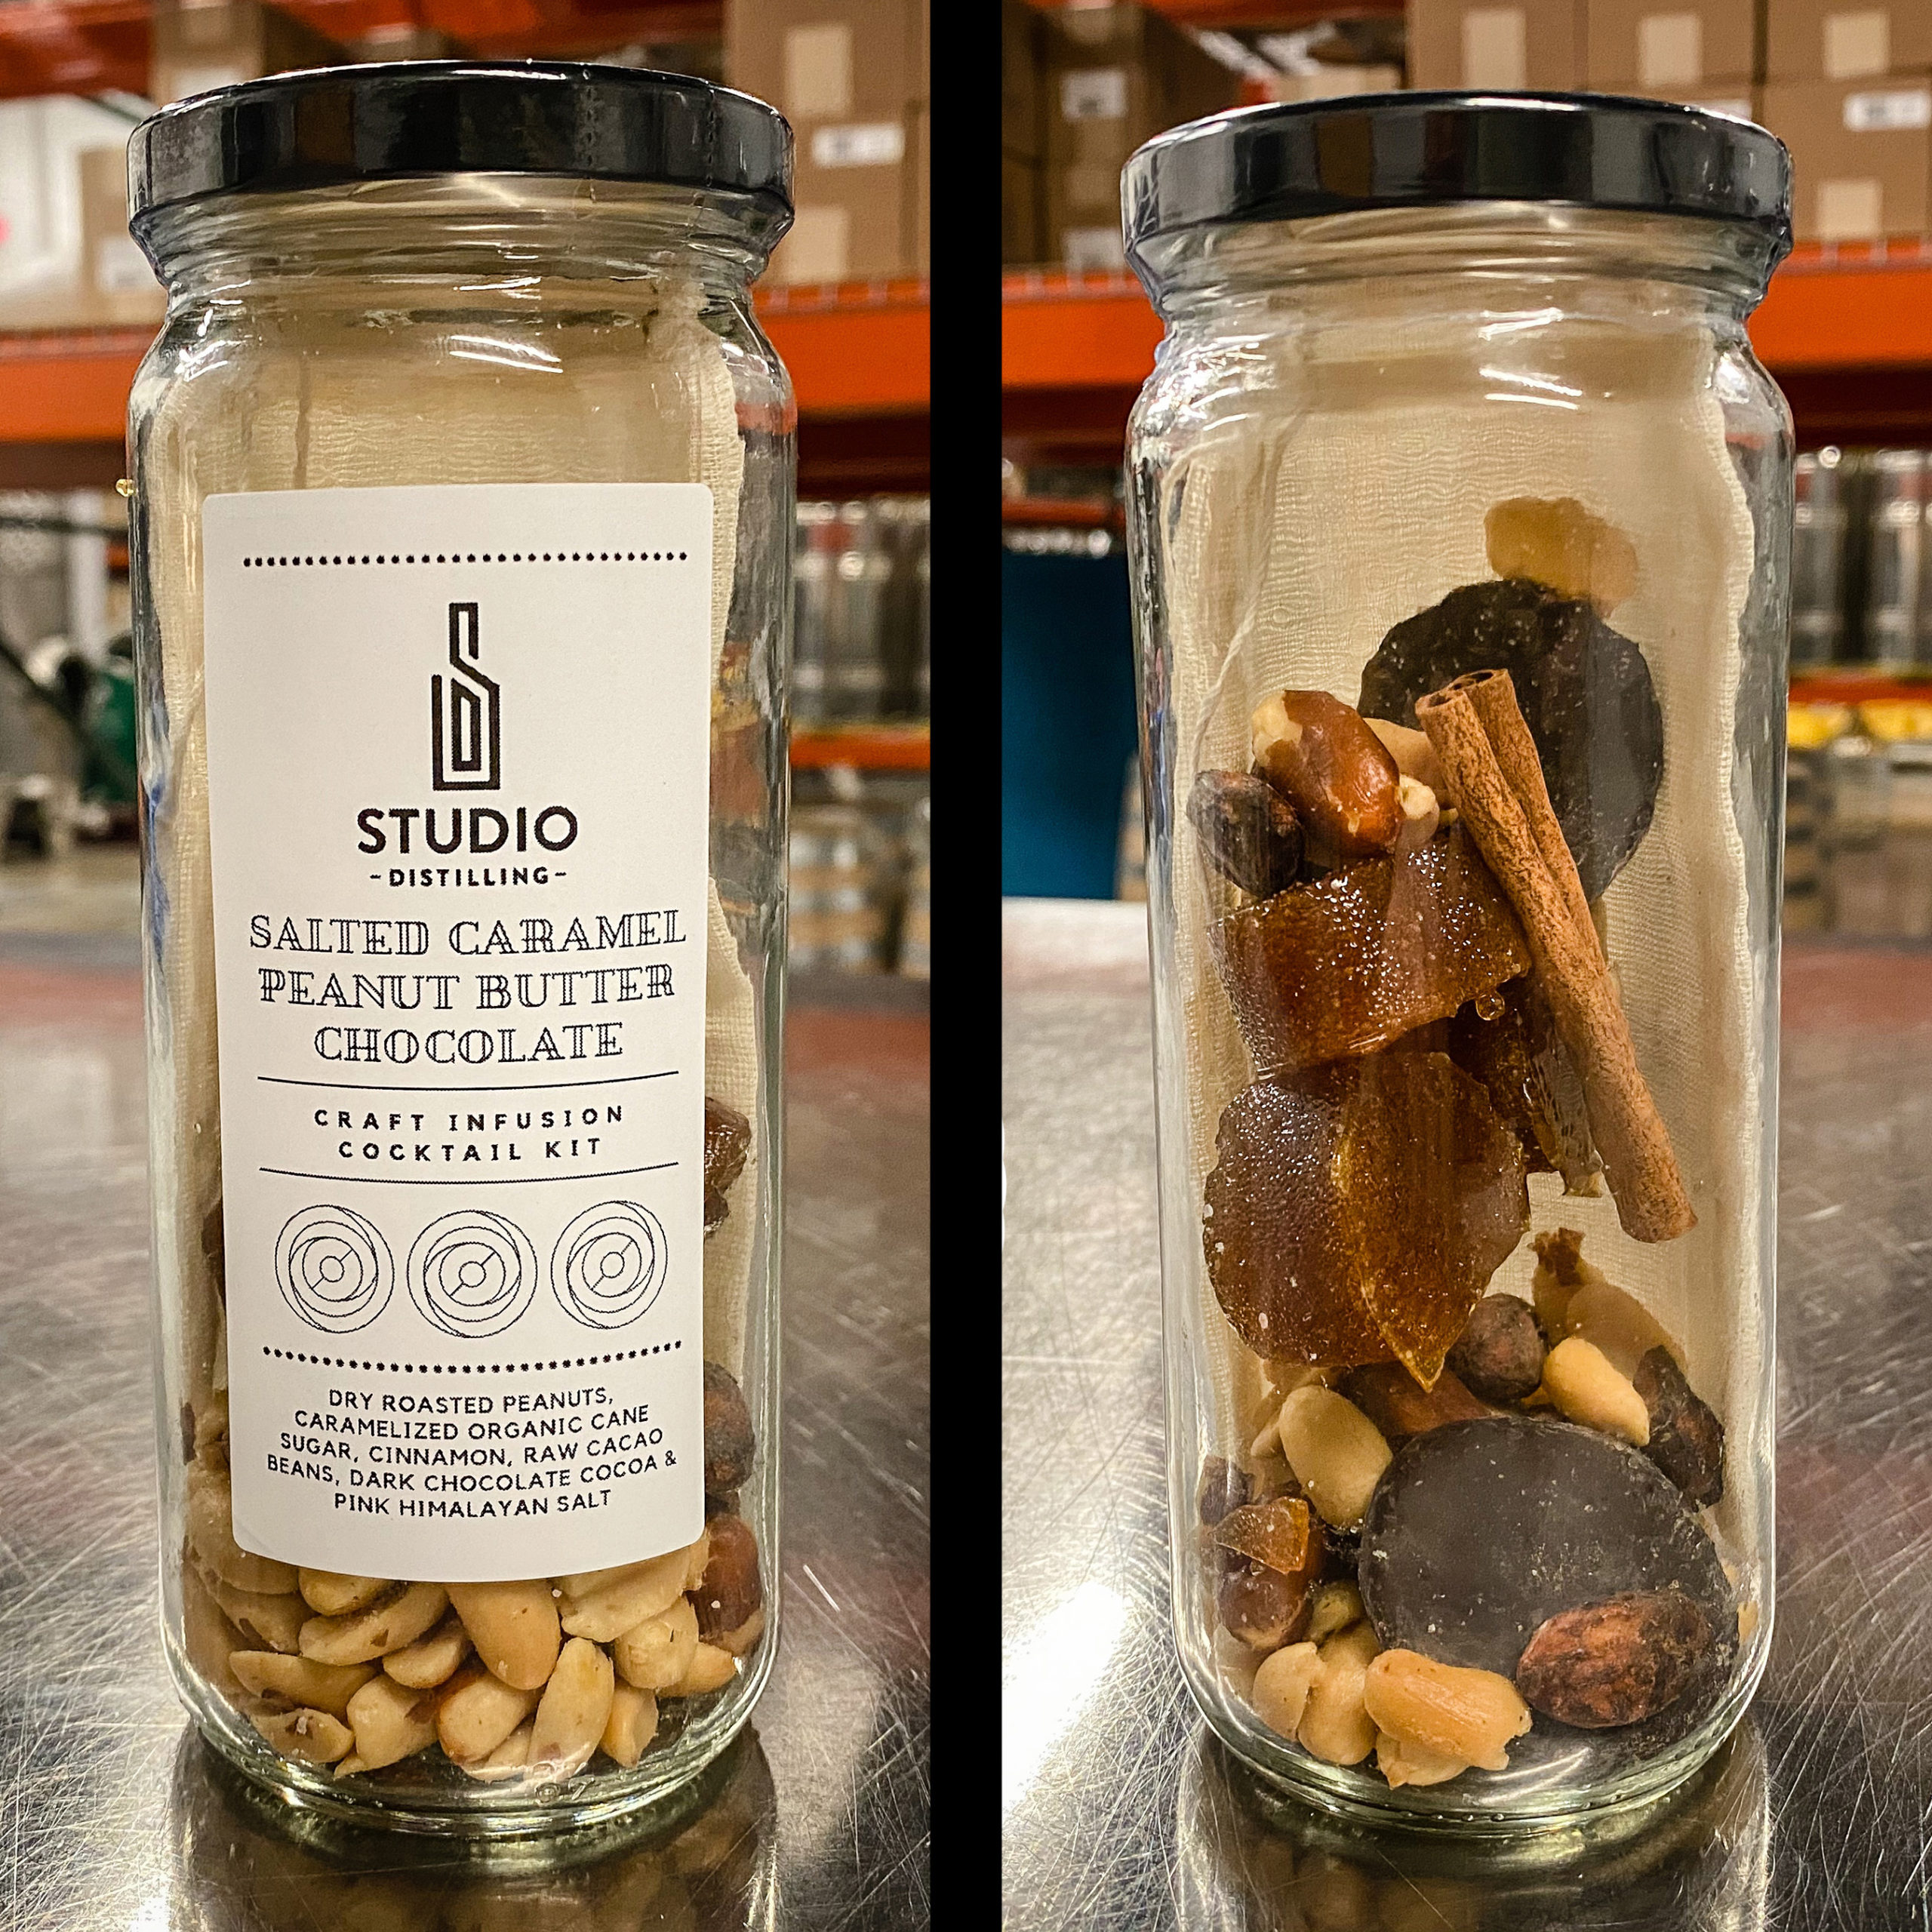 Salted Caramel Peanut Butter Chocolate Craft Infusion Cocktail Kit